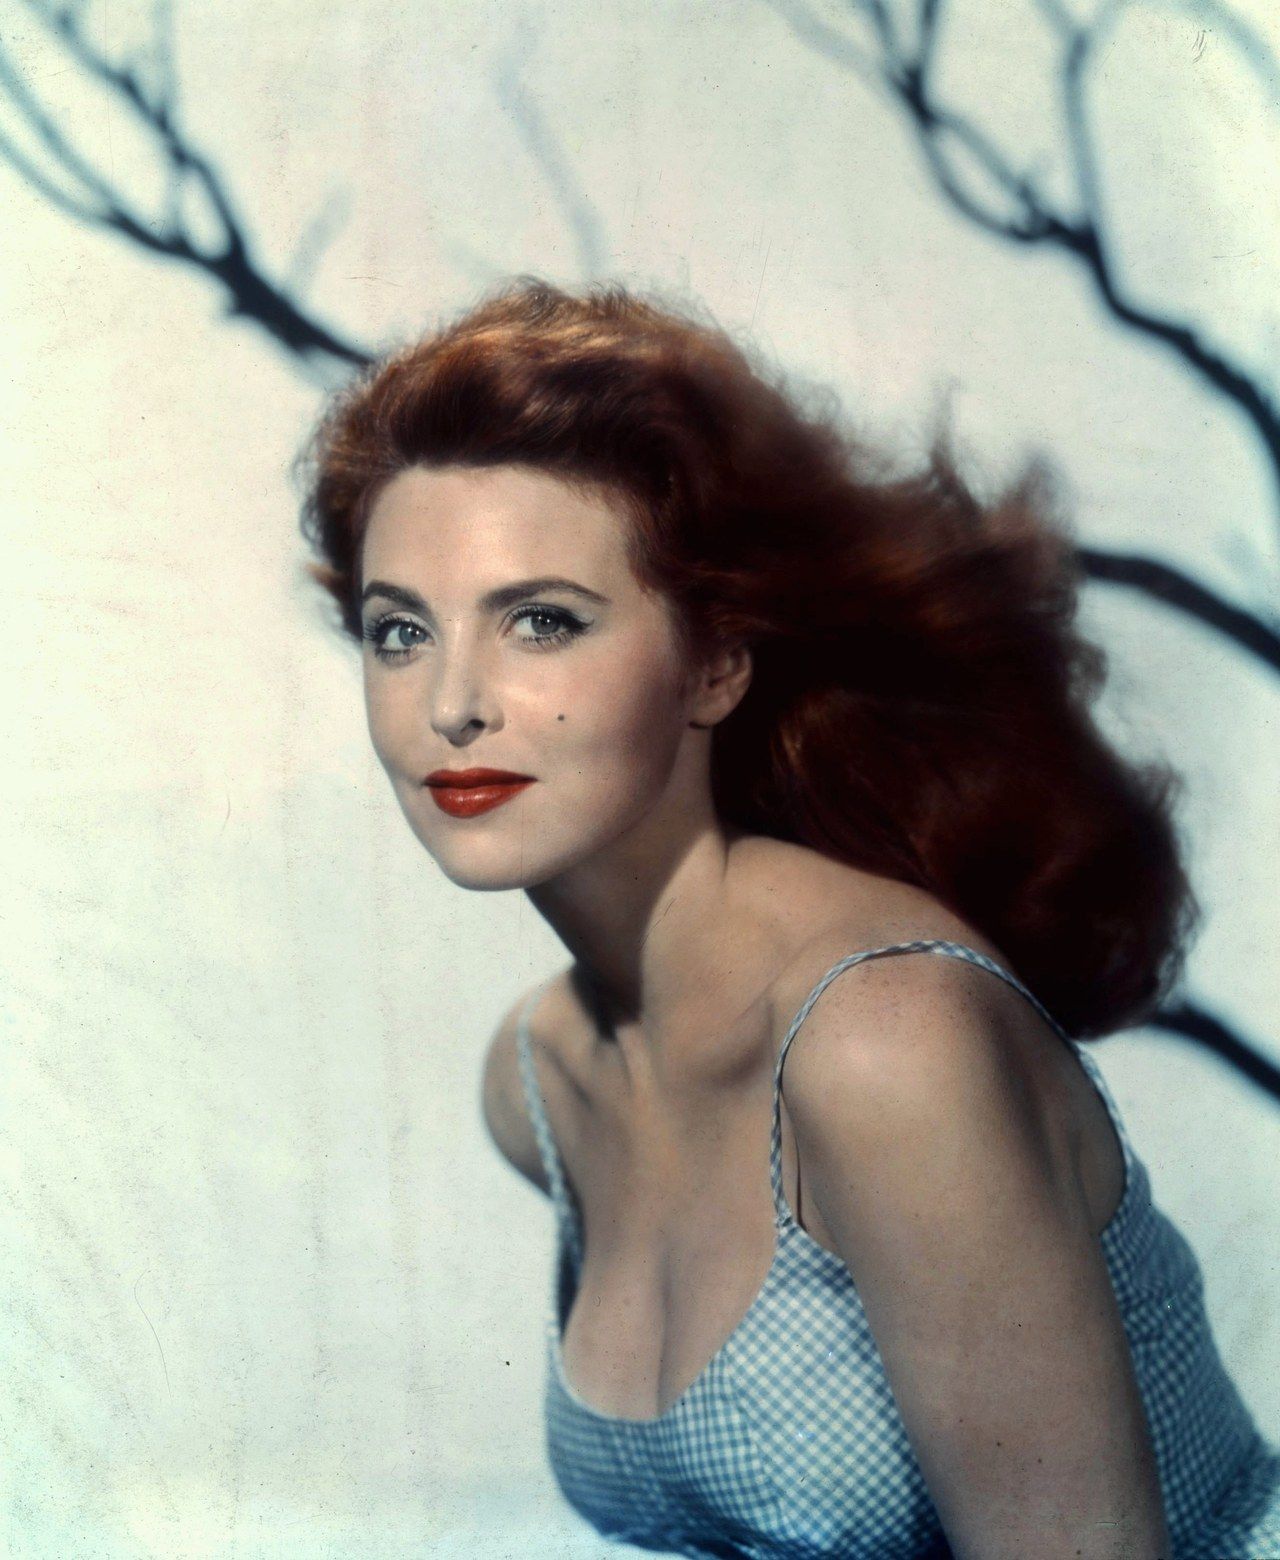 Tina Louise | Photos of Movie Stars and Singers I Luff | Pinterest ...